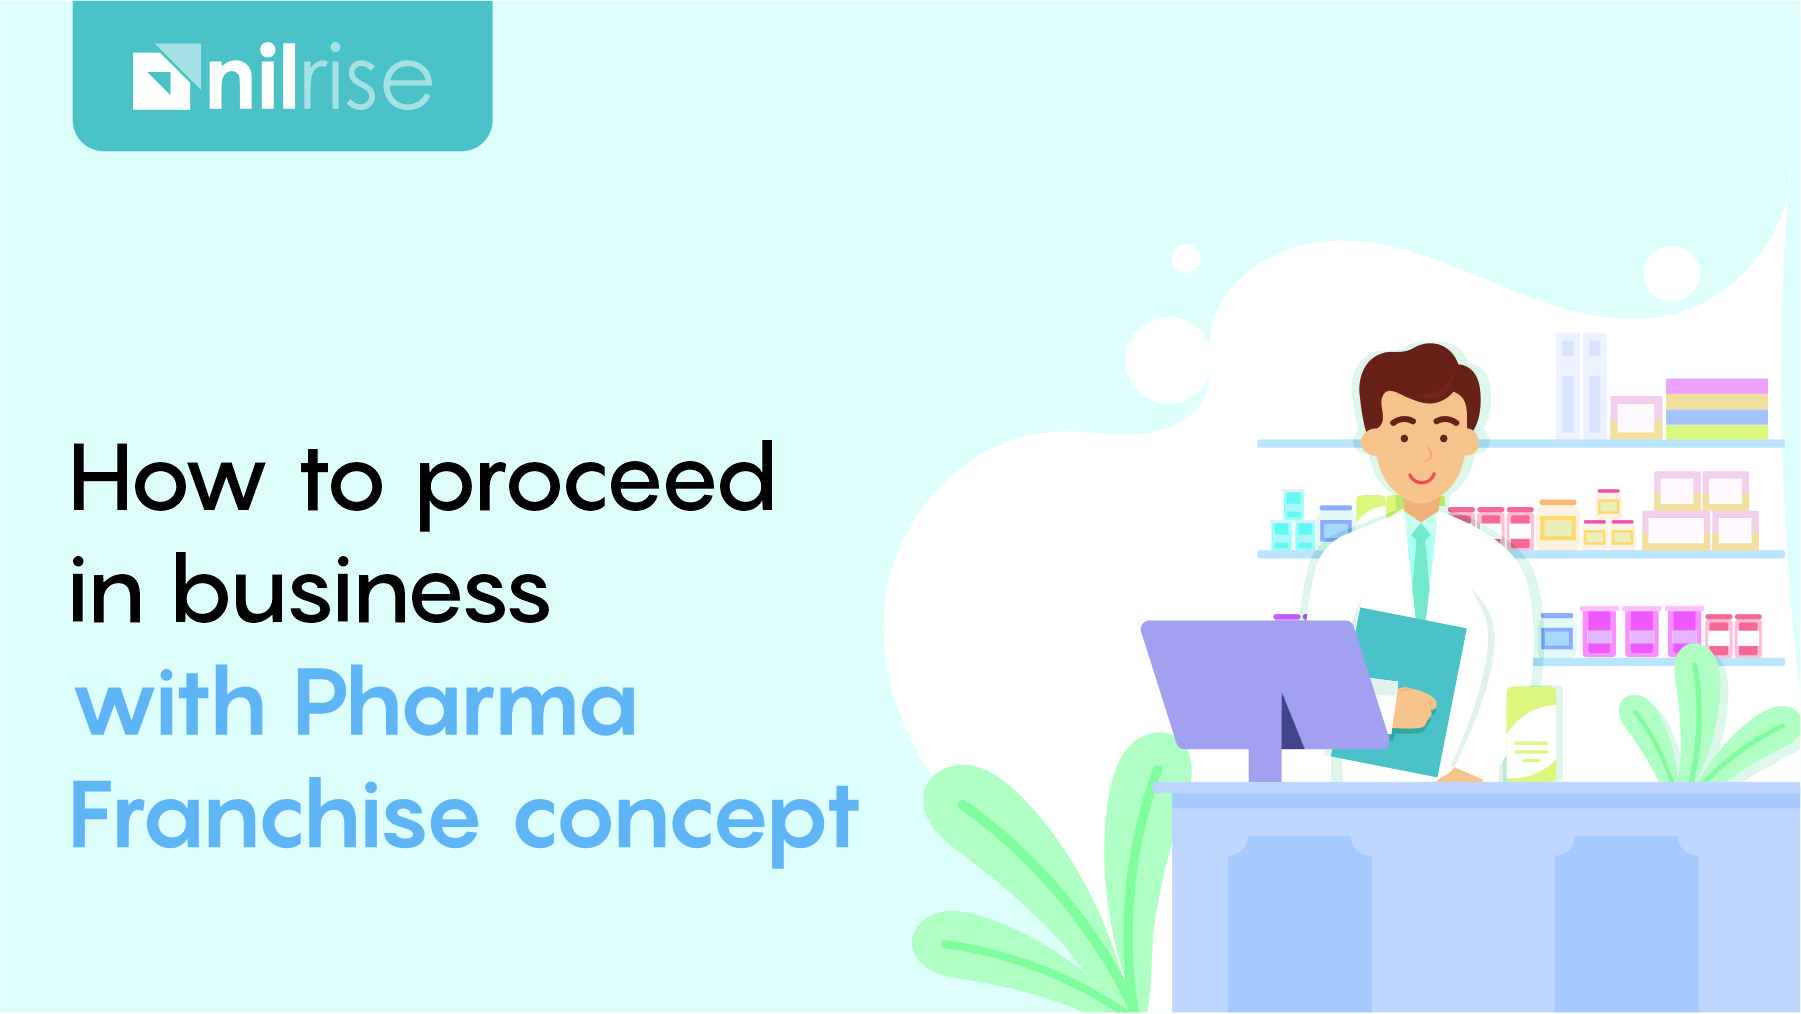 How to proceed in business with Pharma Franchise concept